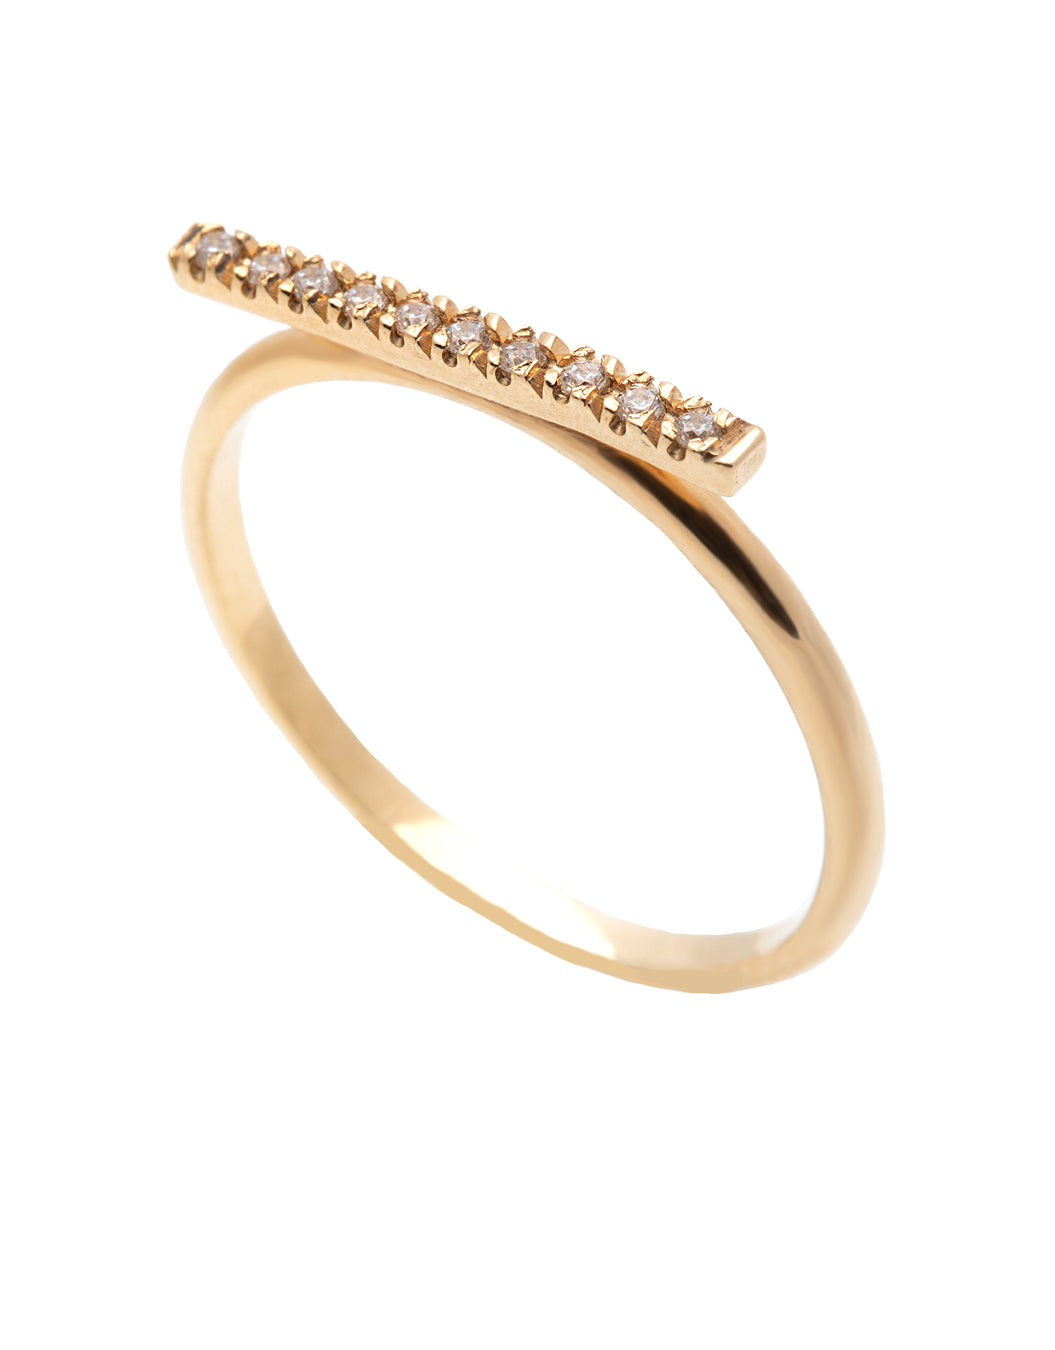 A dainty 14k yellow gold ring, with a horizontal bar on top, set with ten tiny white diamonds. 